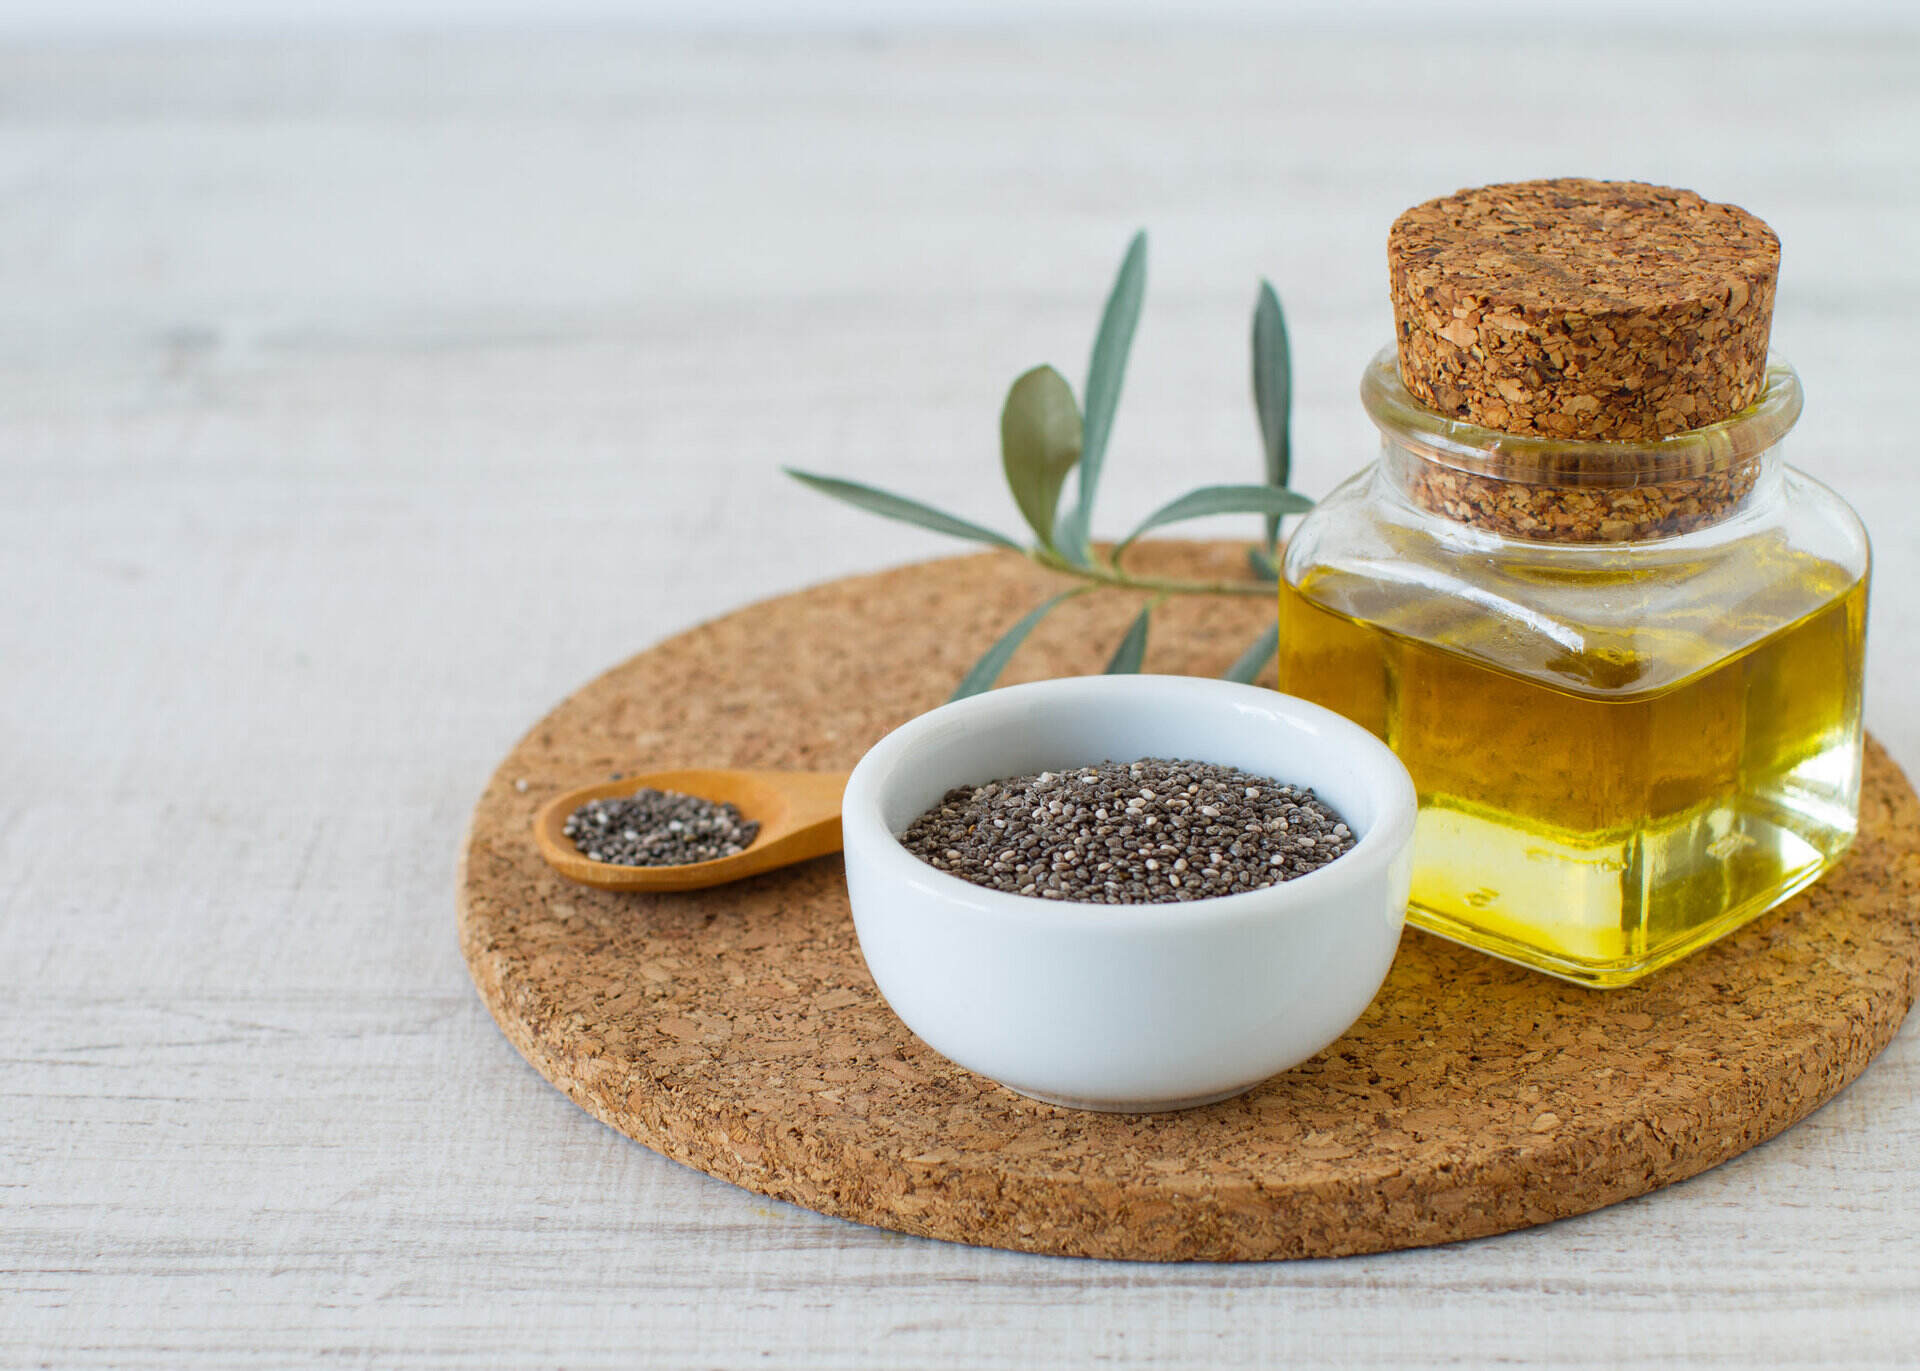 How To Make Chia Seed Oil For Hair